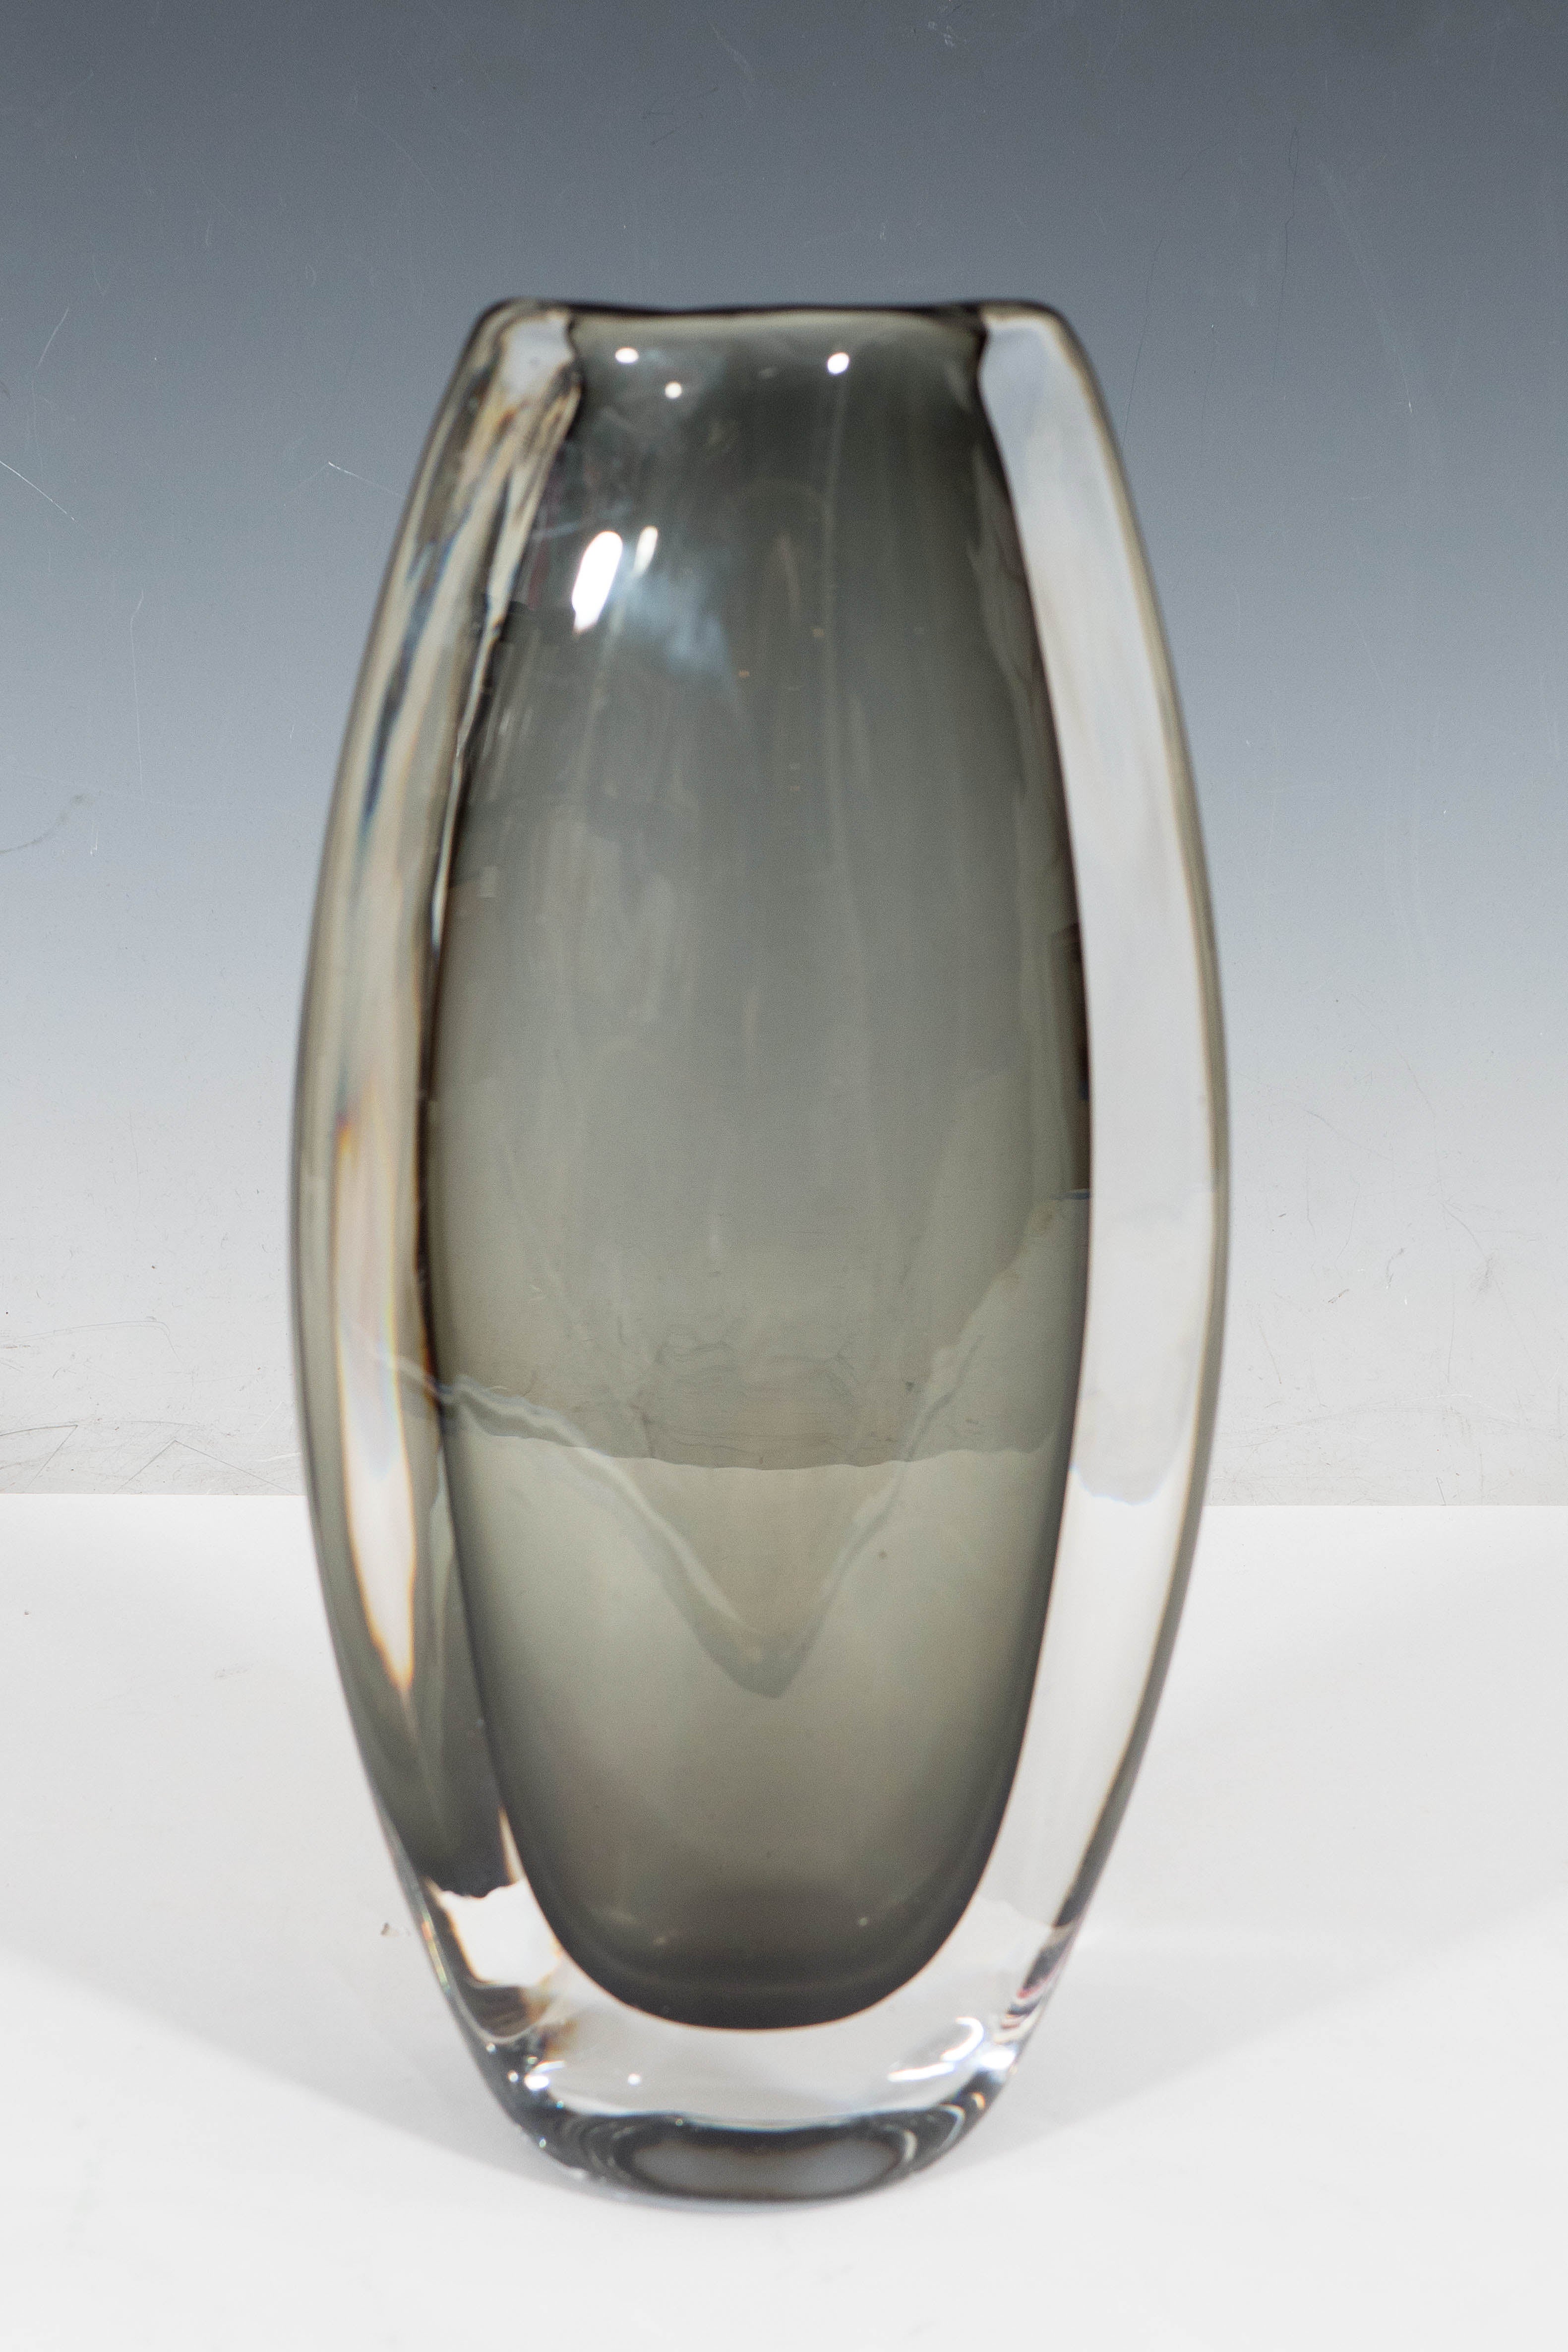 A Swedish vintage 'sommerso' glass vase, produced circa 1950's -60's by designer Nils Landberg (1907-1991) for Orrefors, with smoked charcoal interior, cased within a clear layer. Markings include etched signature on the bottom [Orrefors 3538/7],